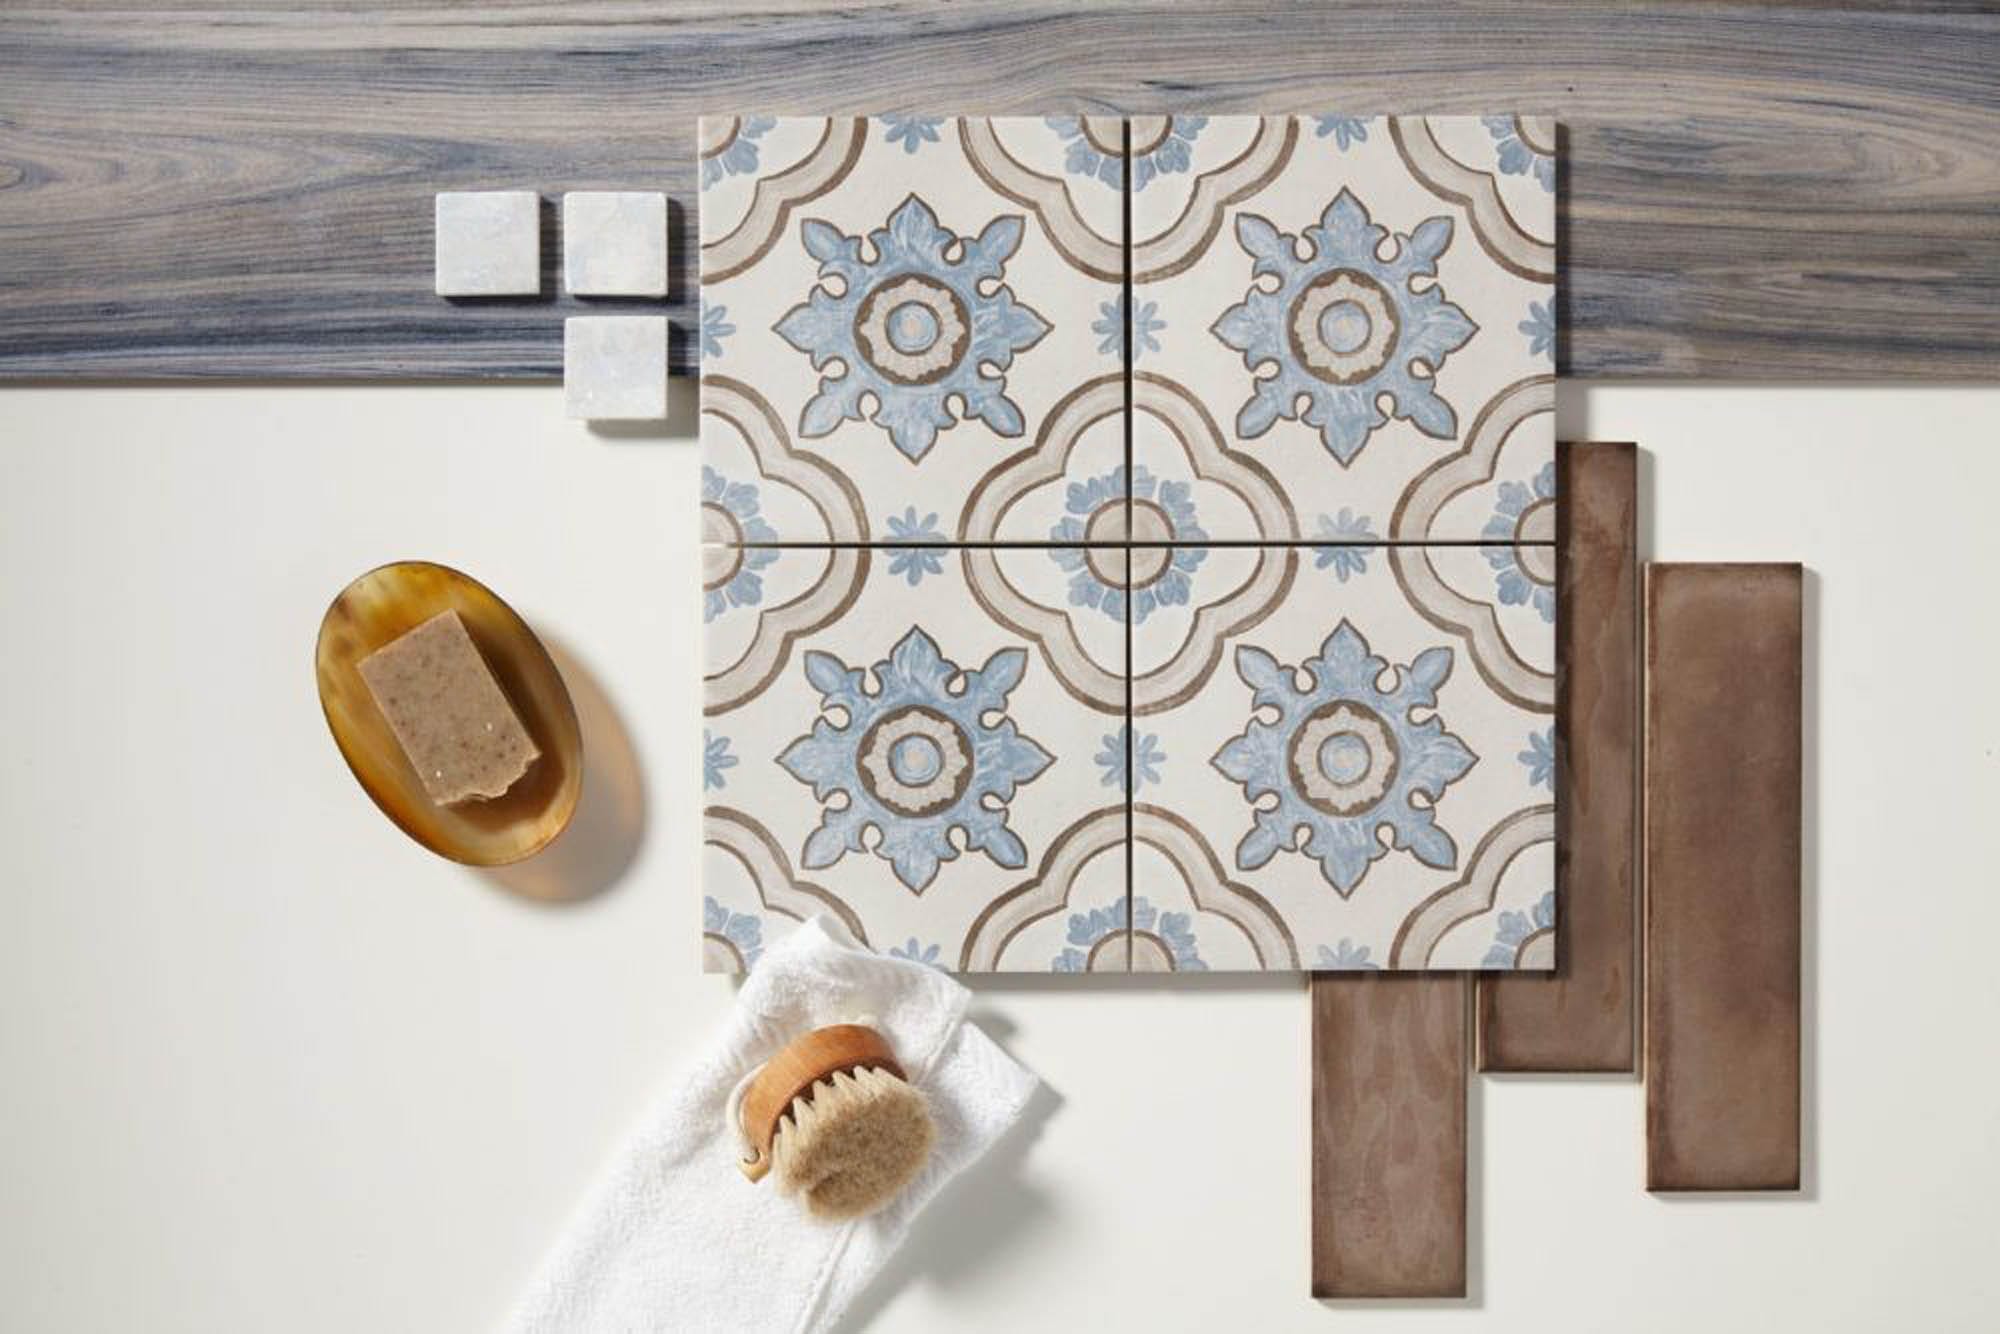 A tile that looks hand painted is perfect for modern farmhouse style